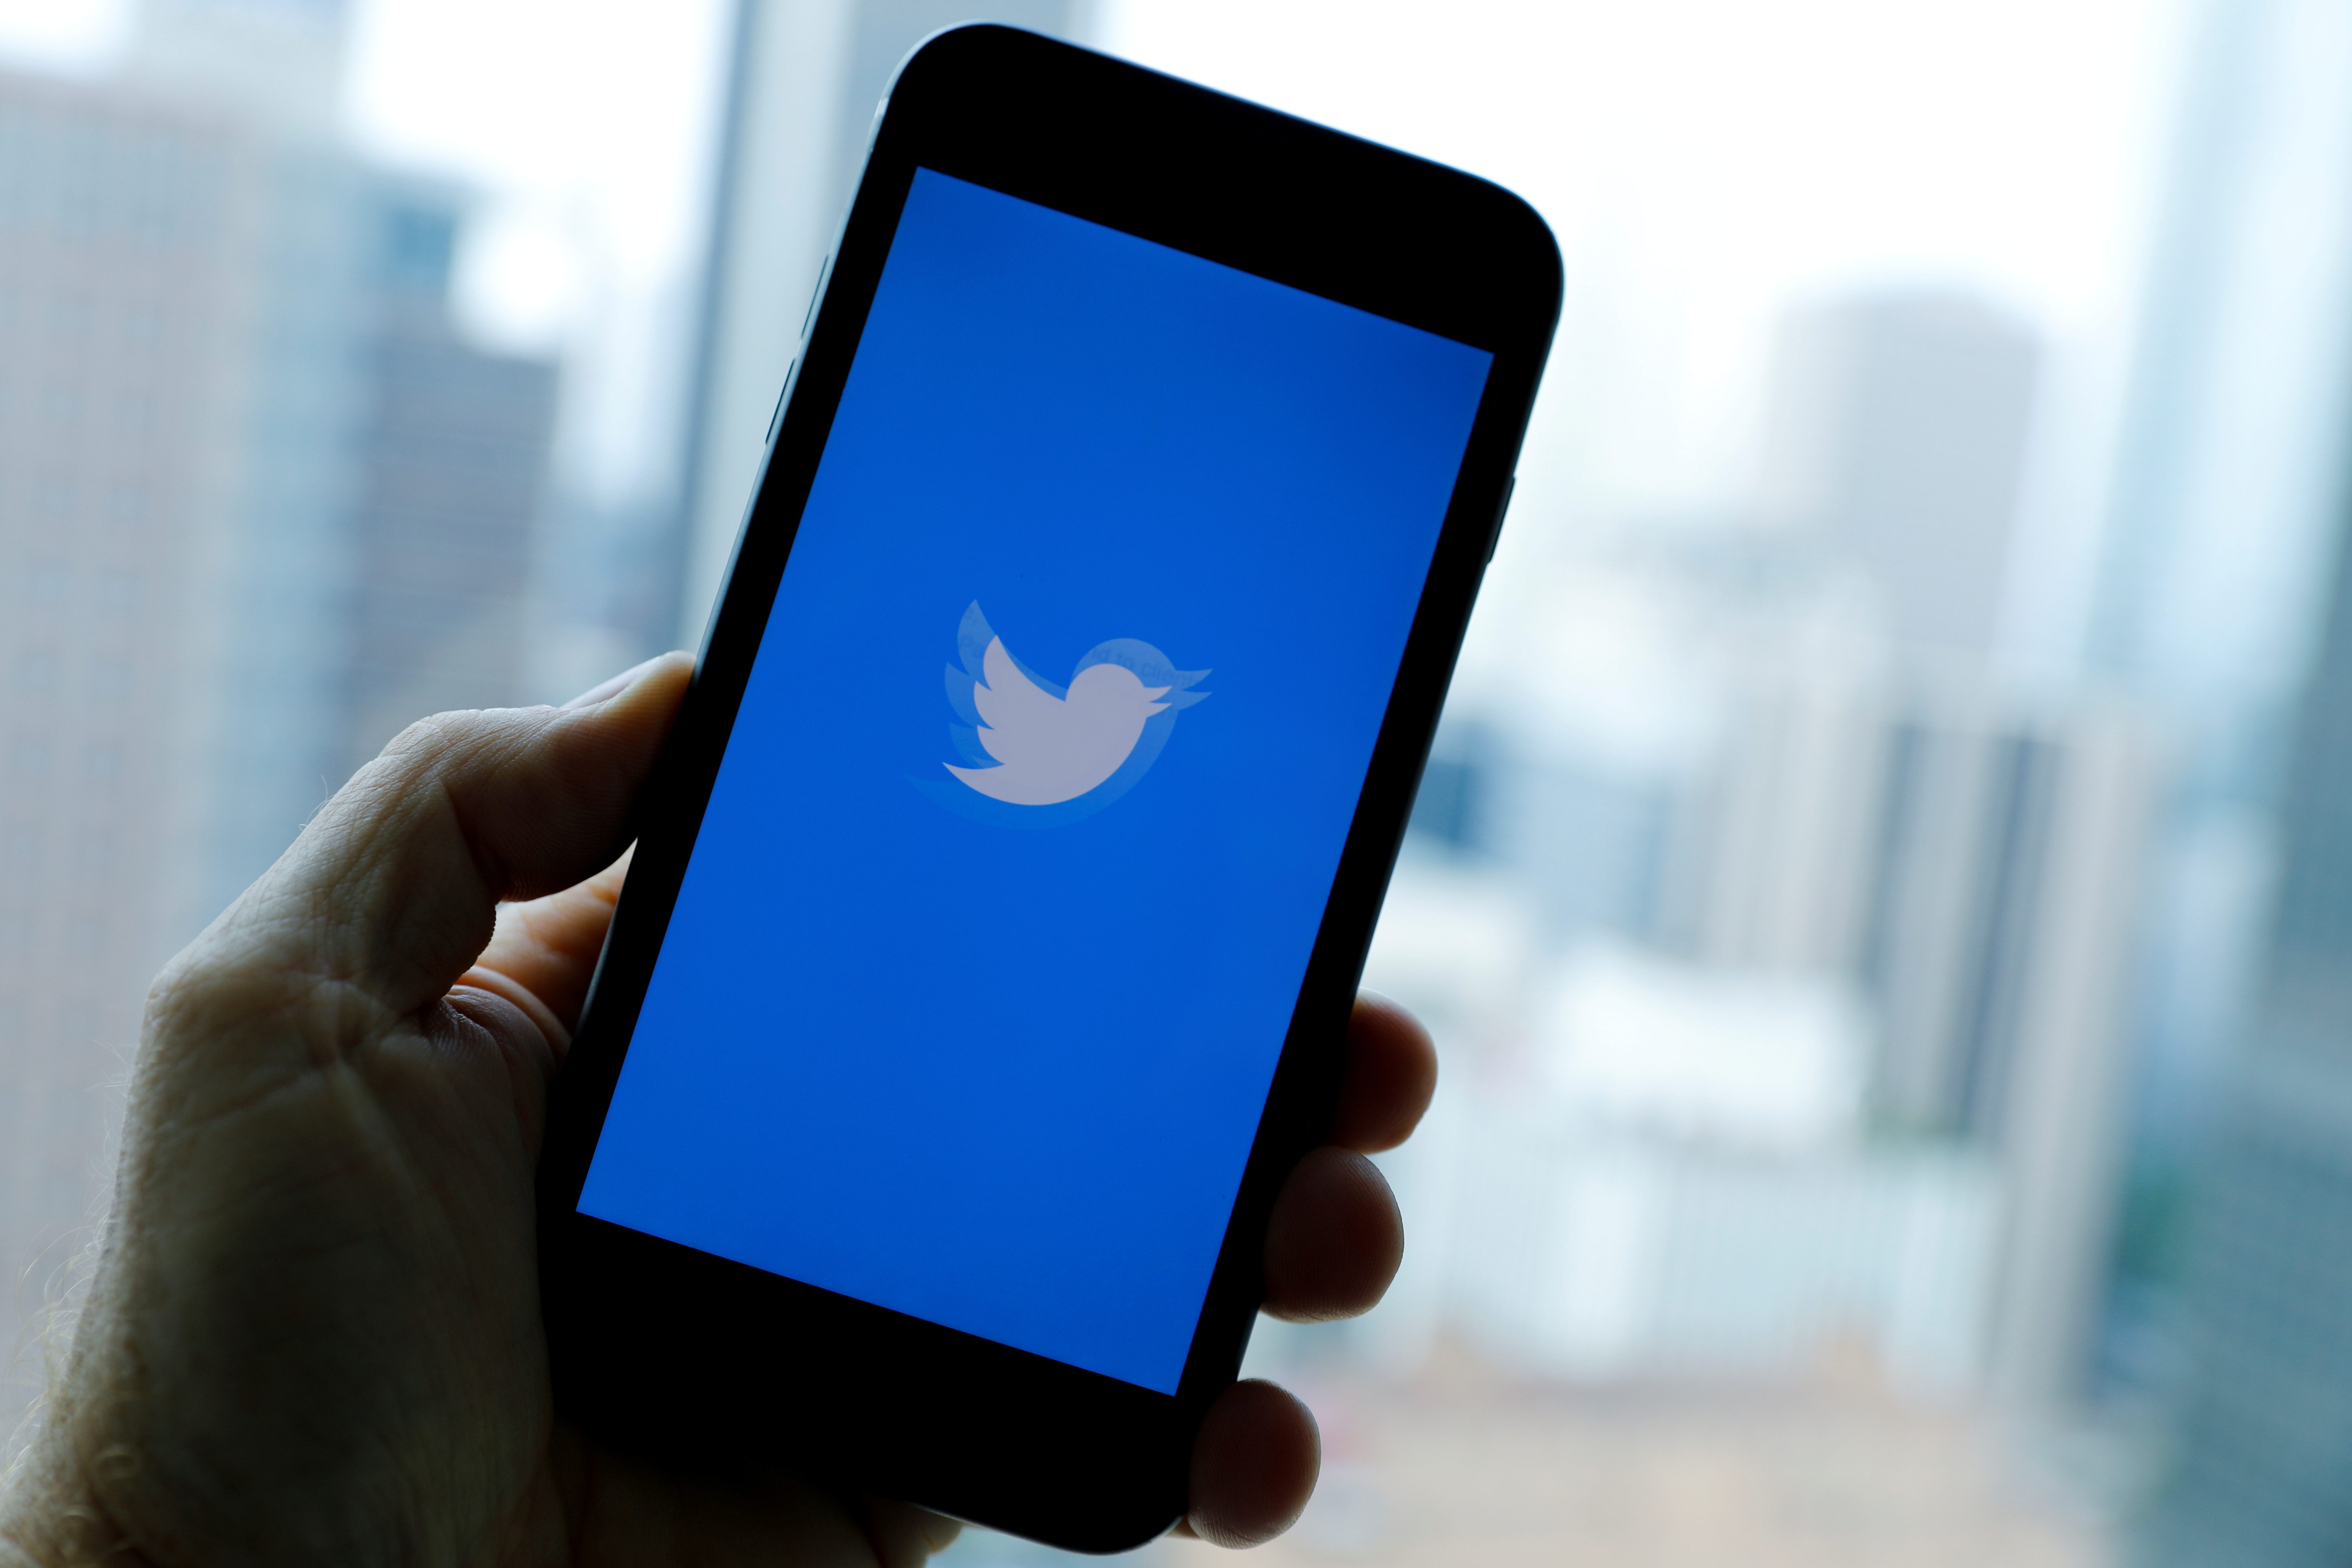 Twitter says it will not fully comply with India gov’t orders to take down some accounts